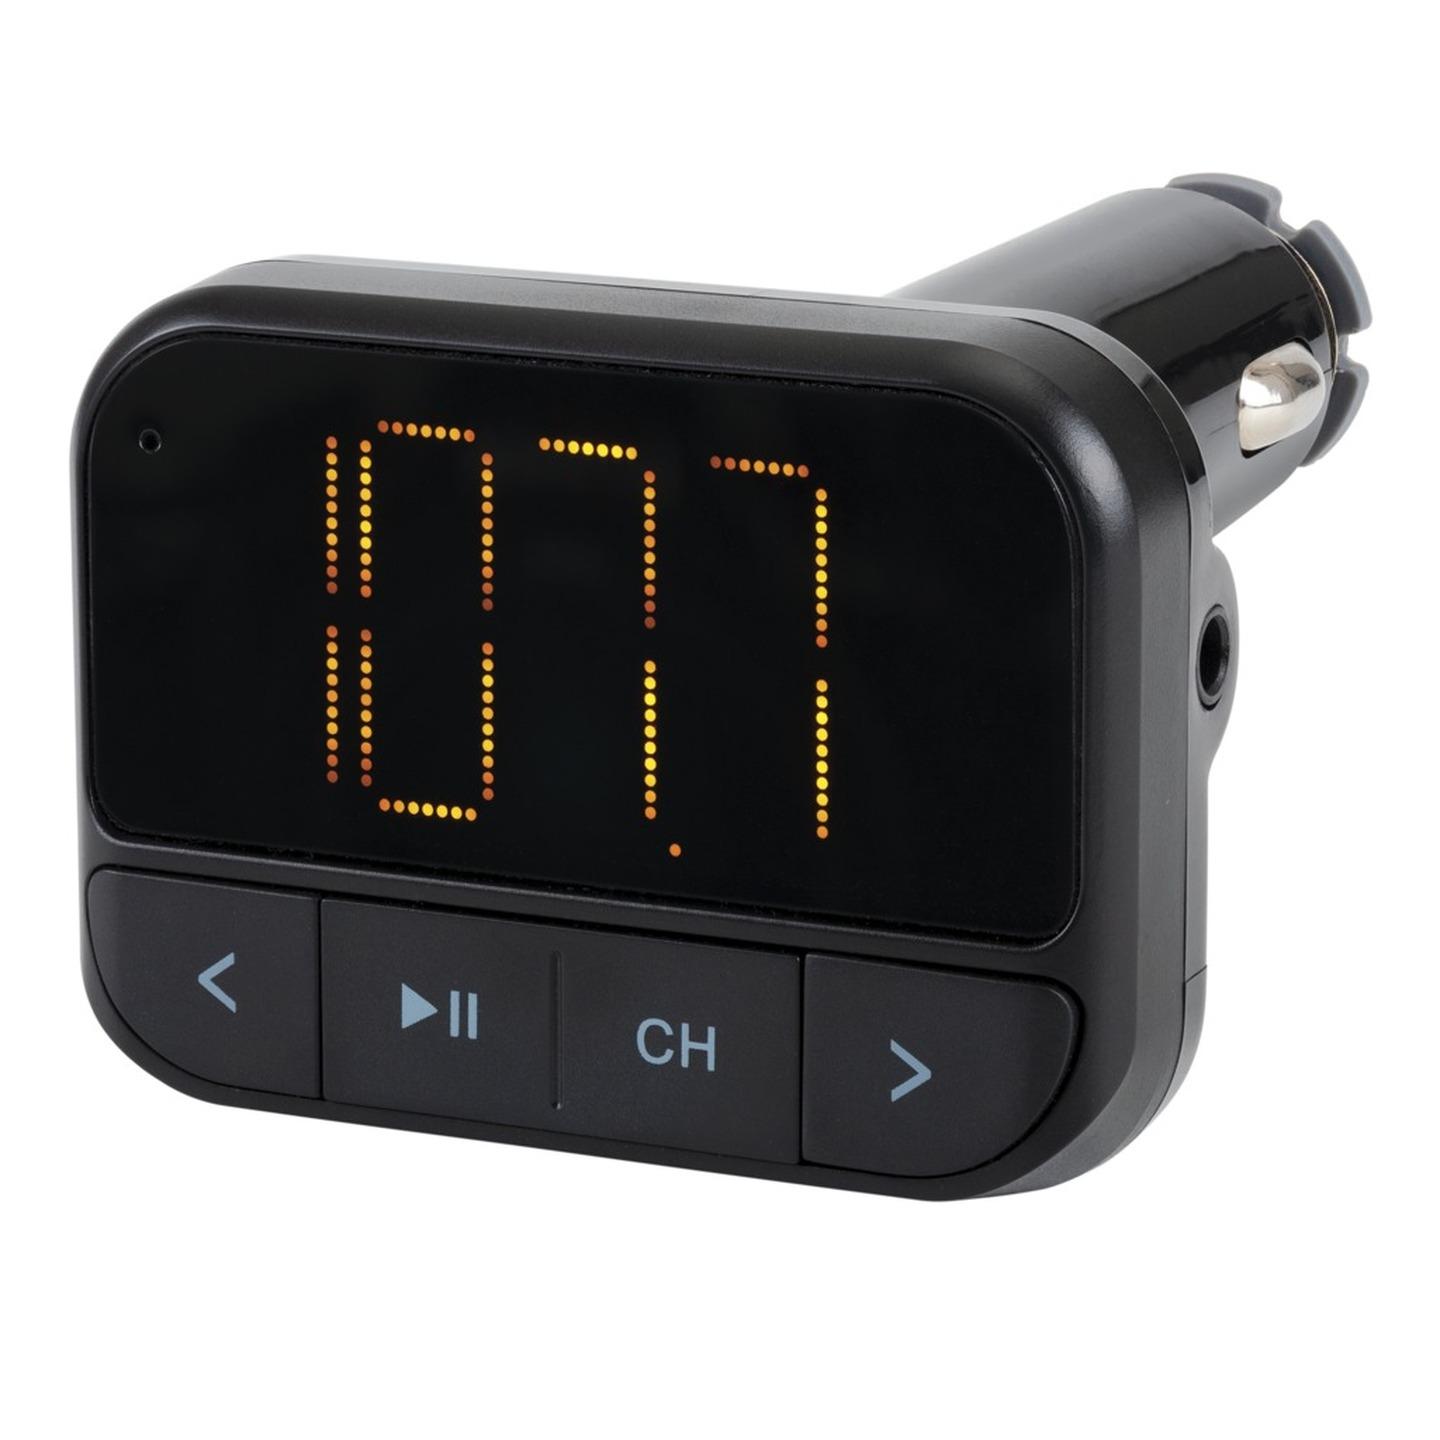 Digitech FM Transmitter with USB and Micro SD Playback